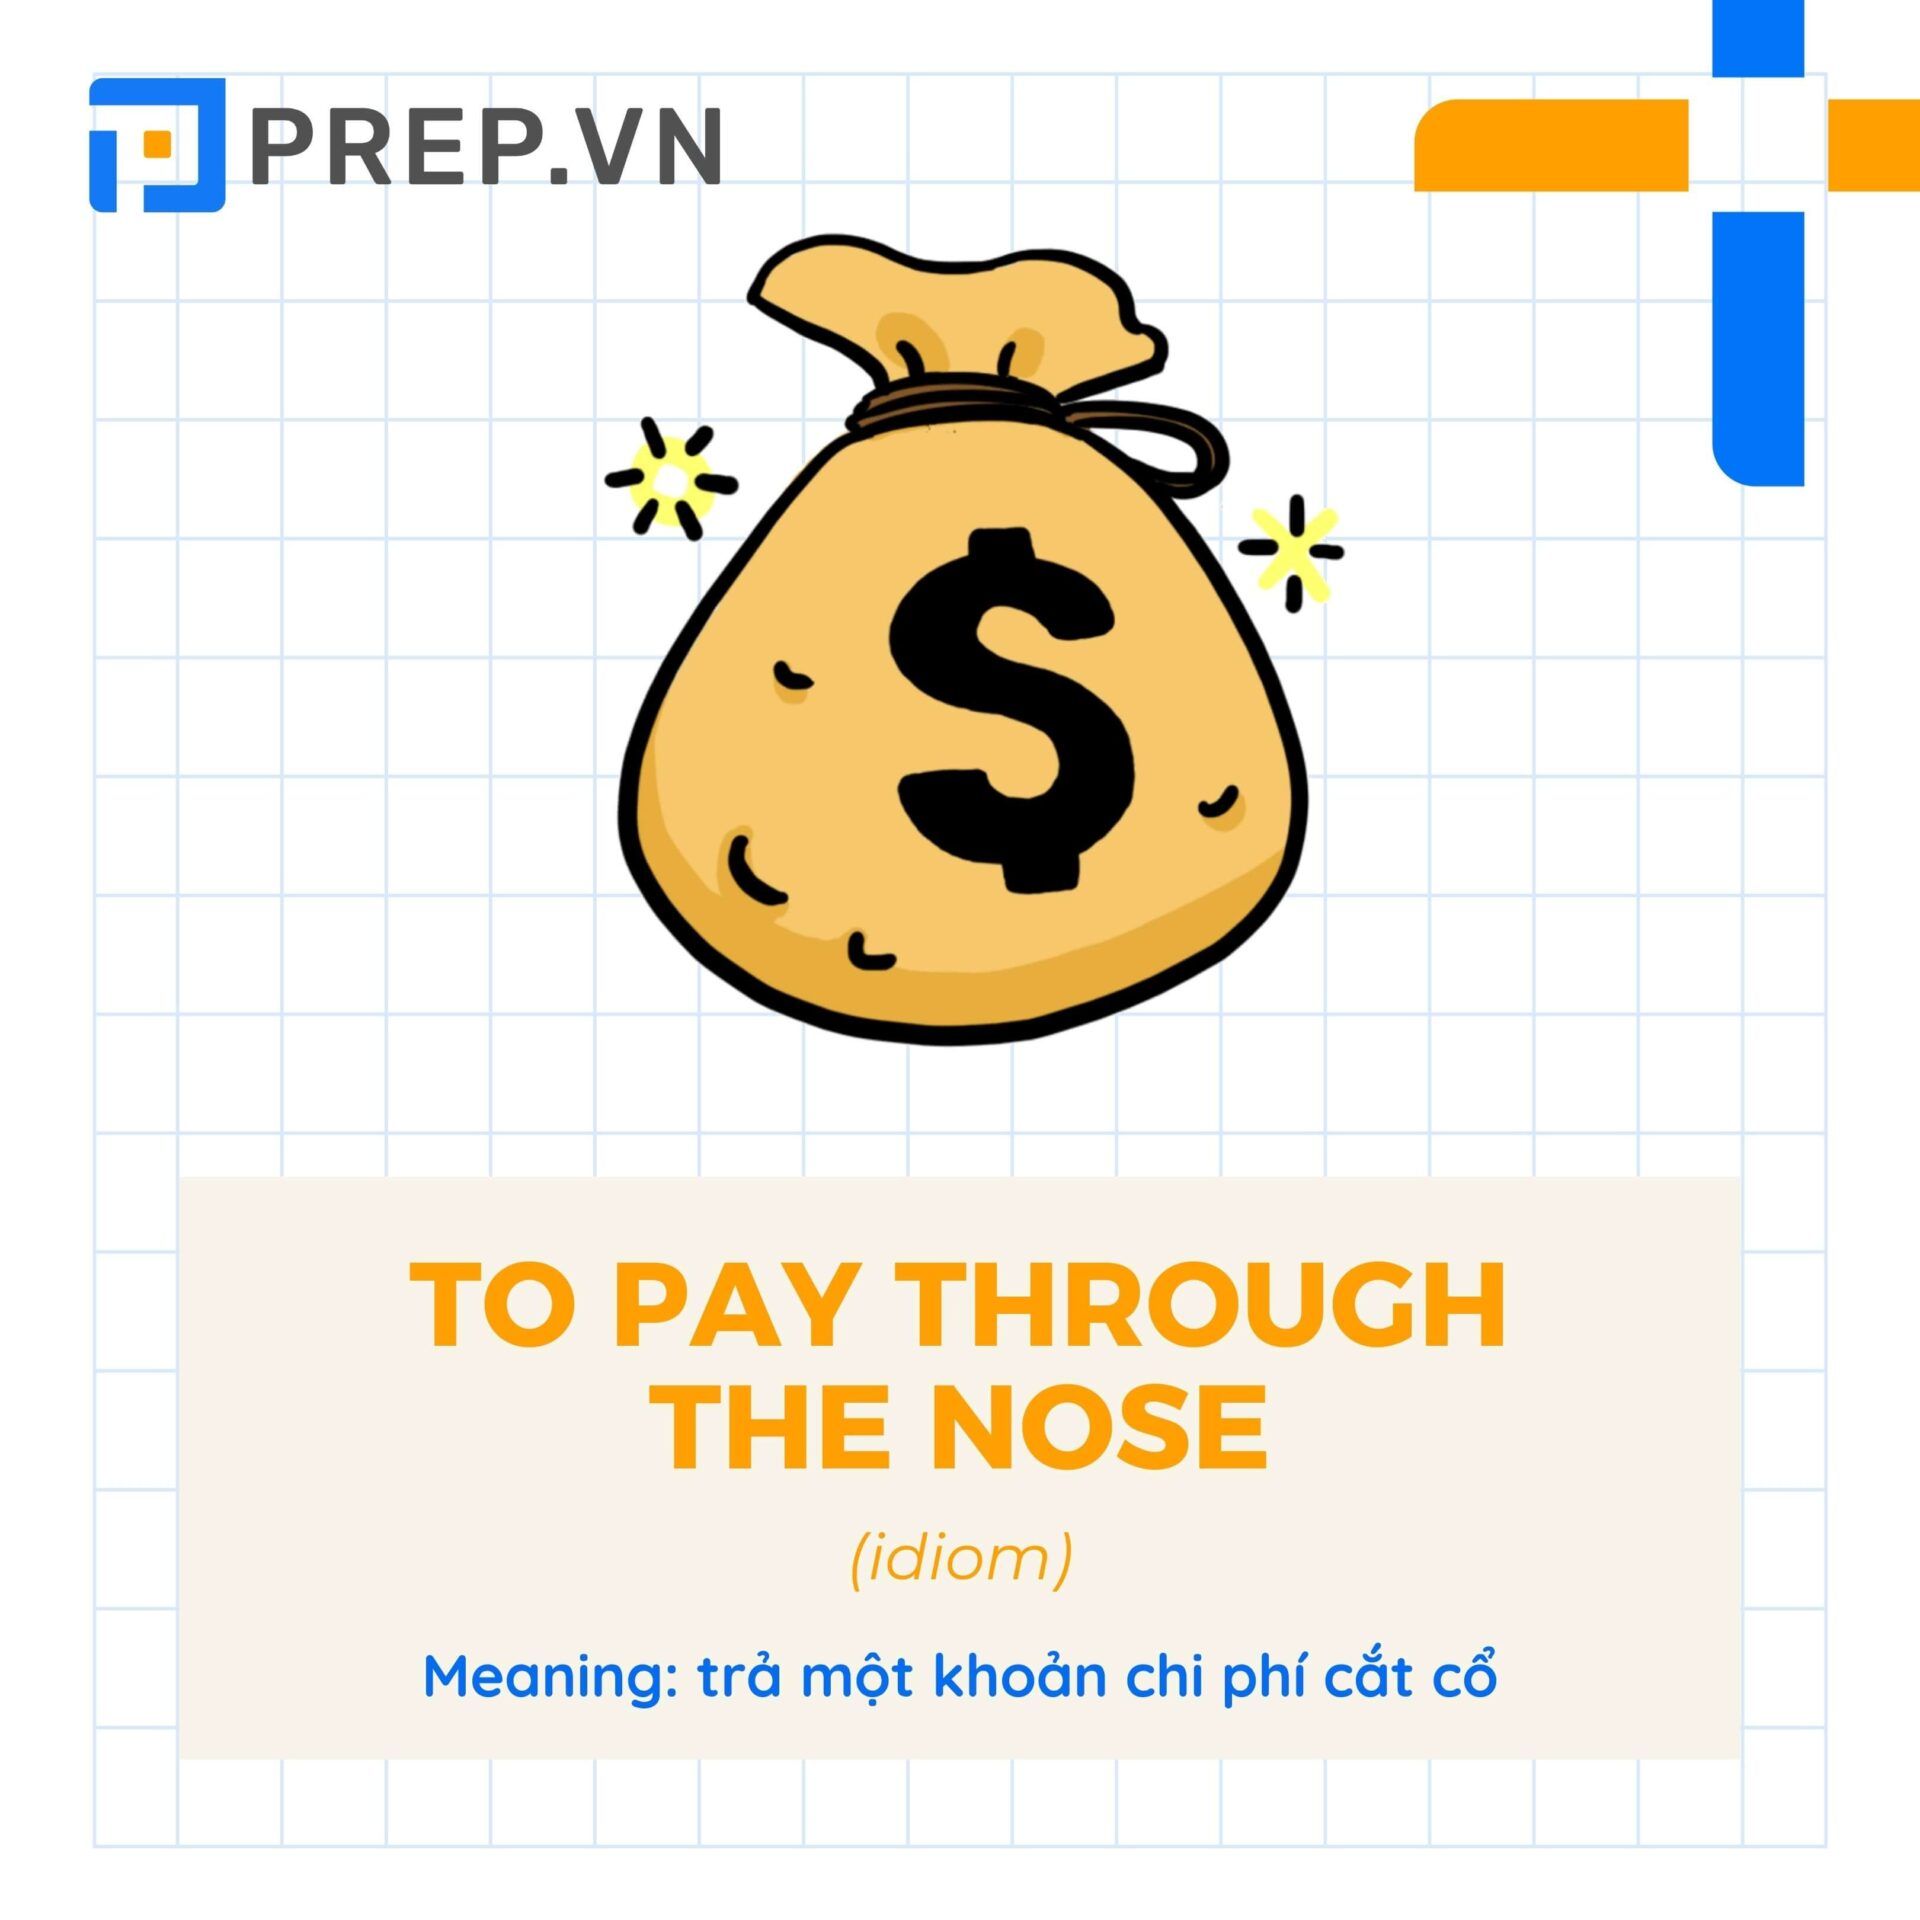 To pay through the nose